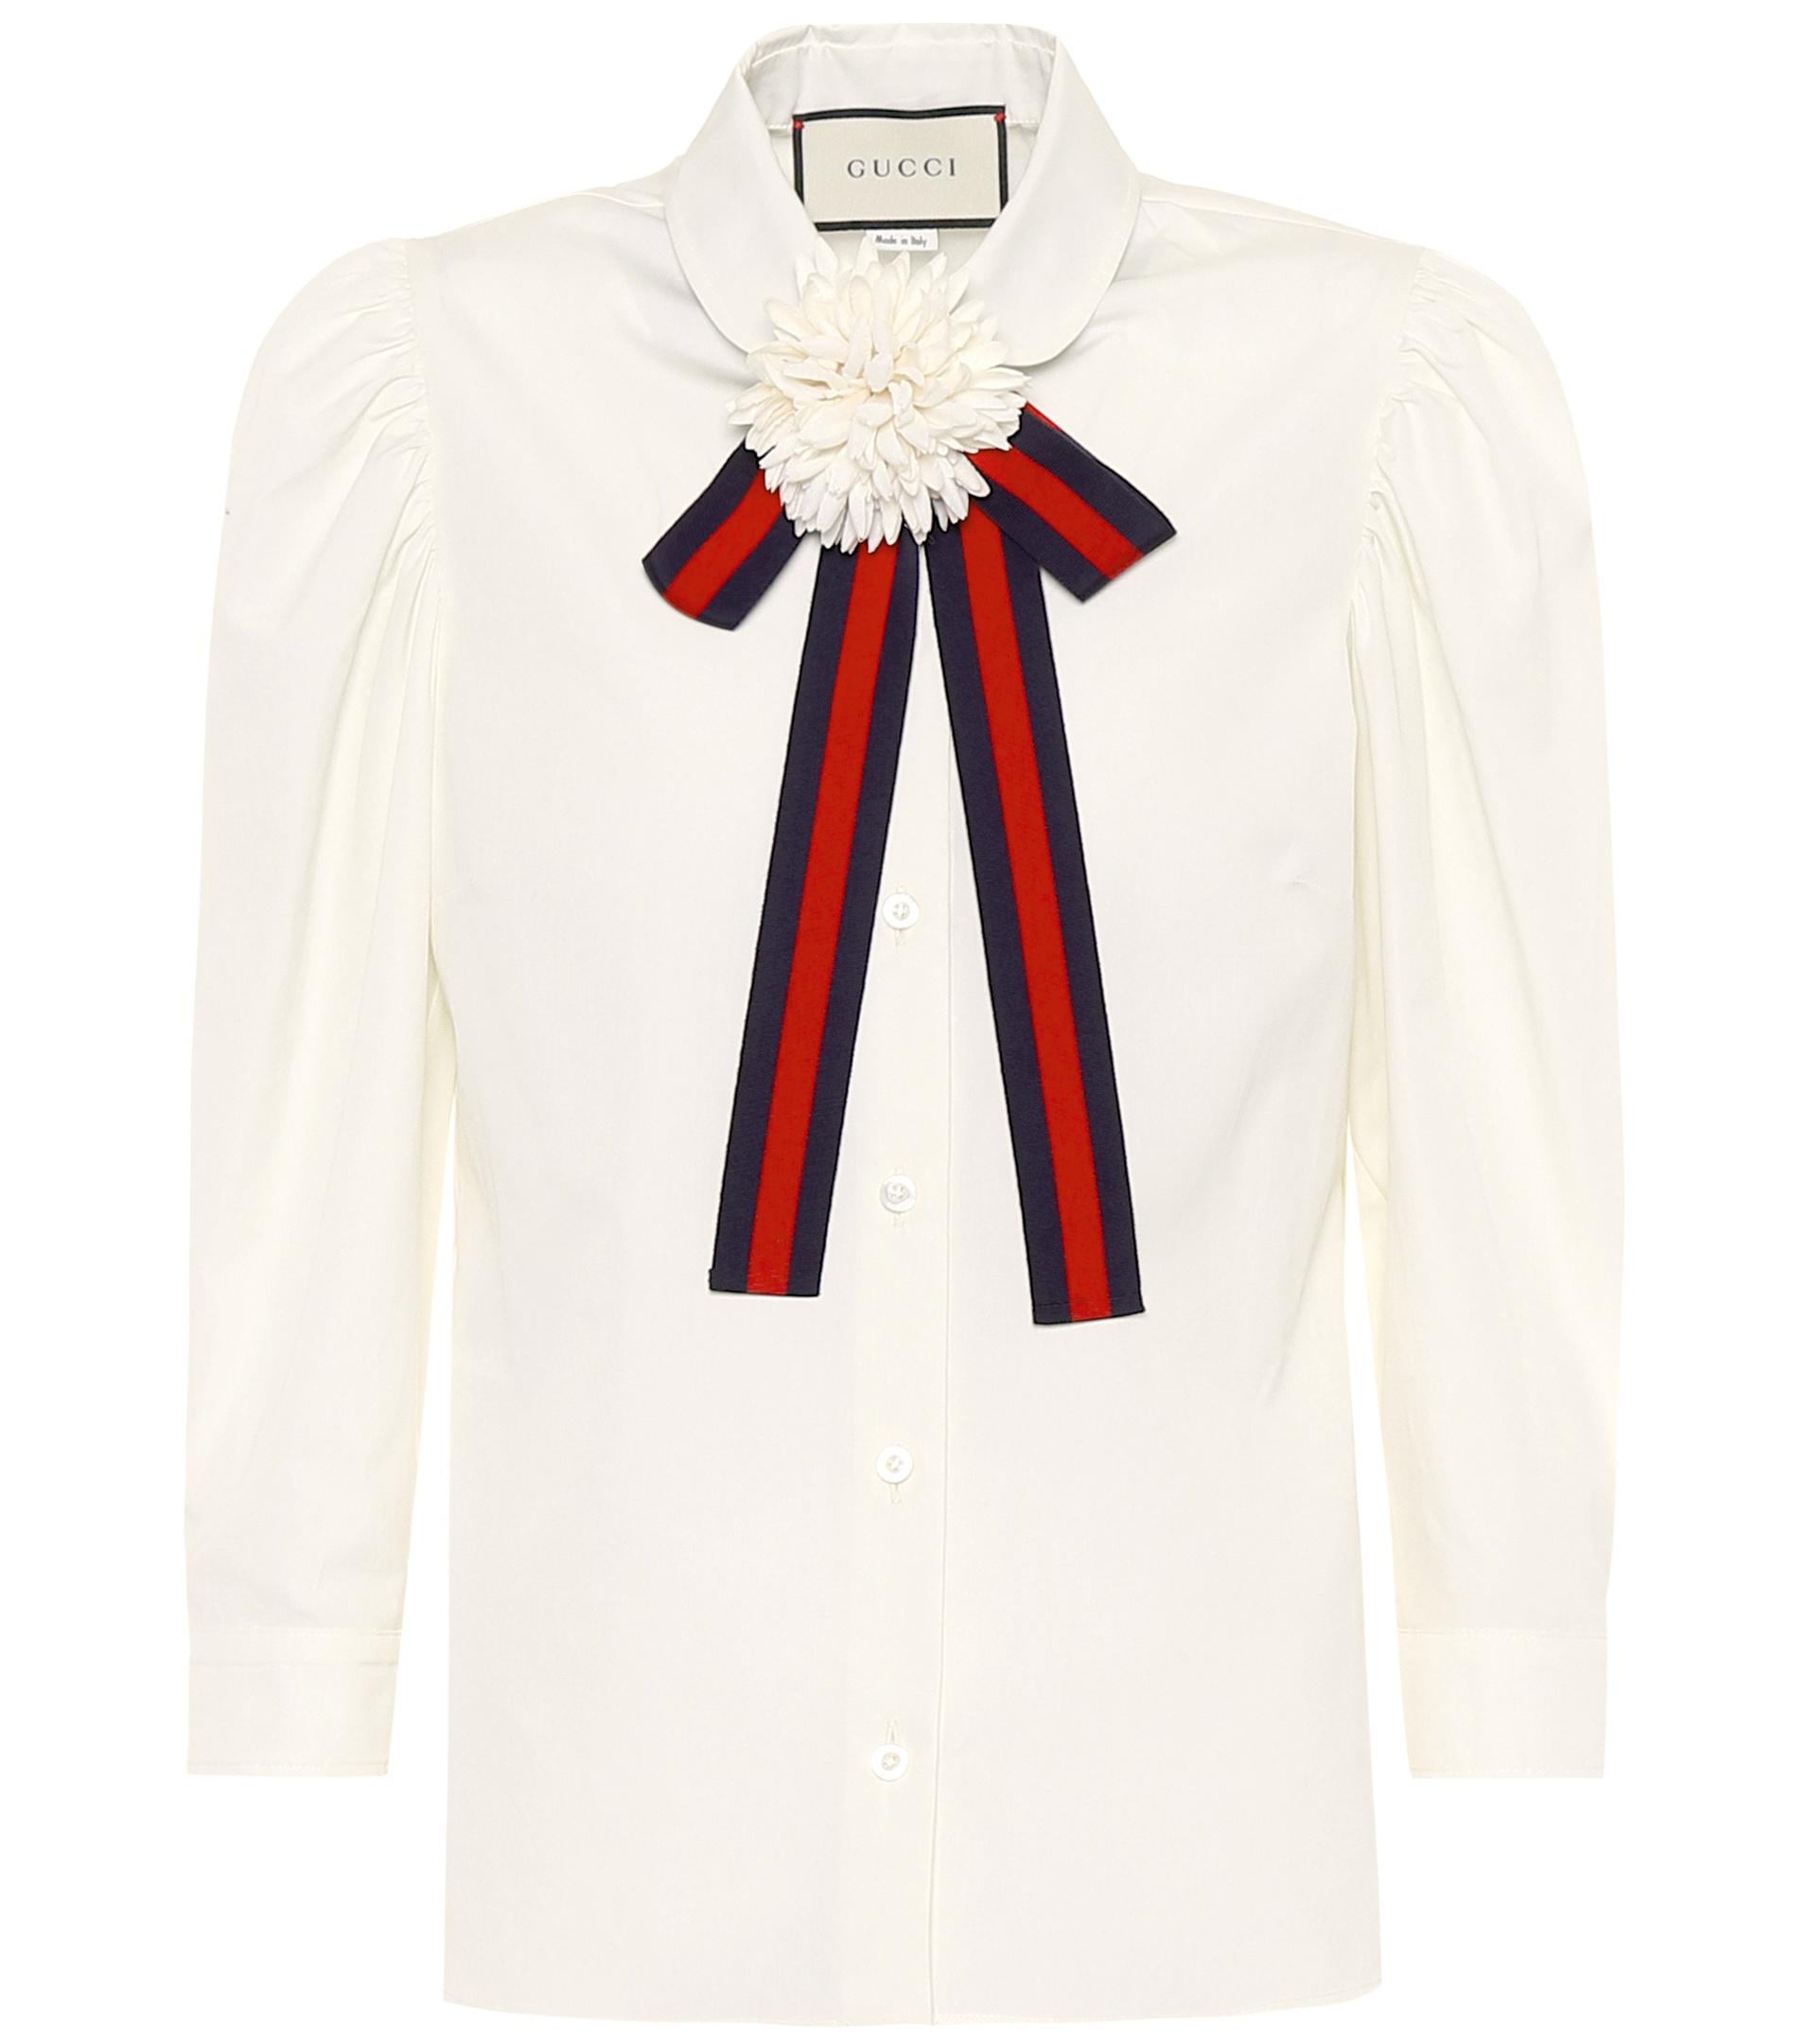 gucci shirt with bow